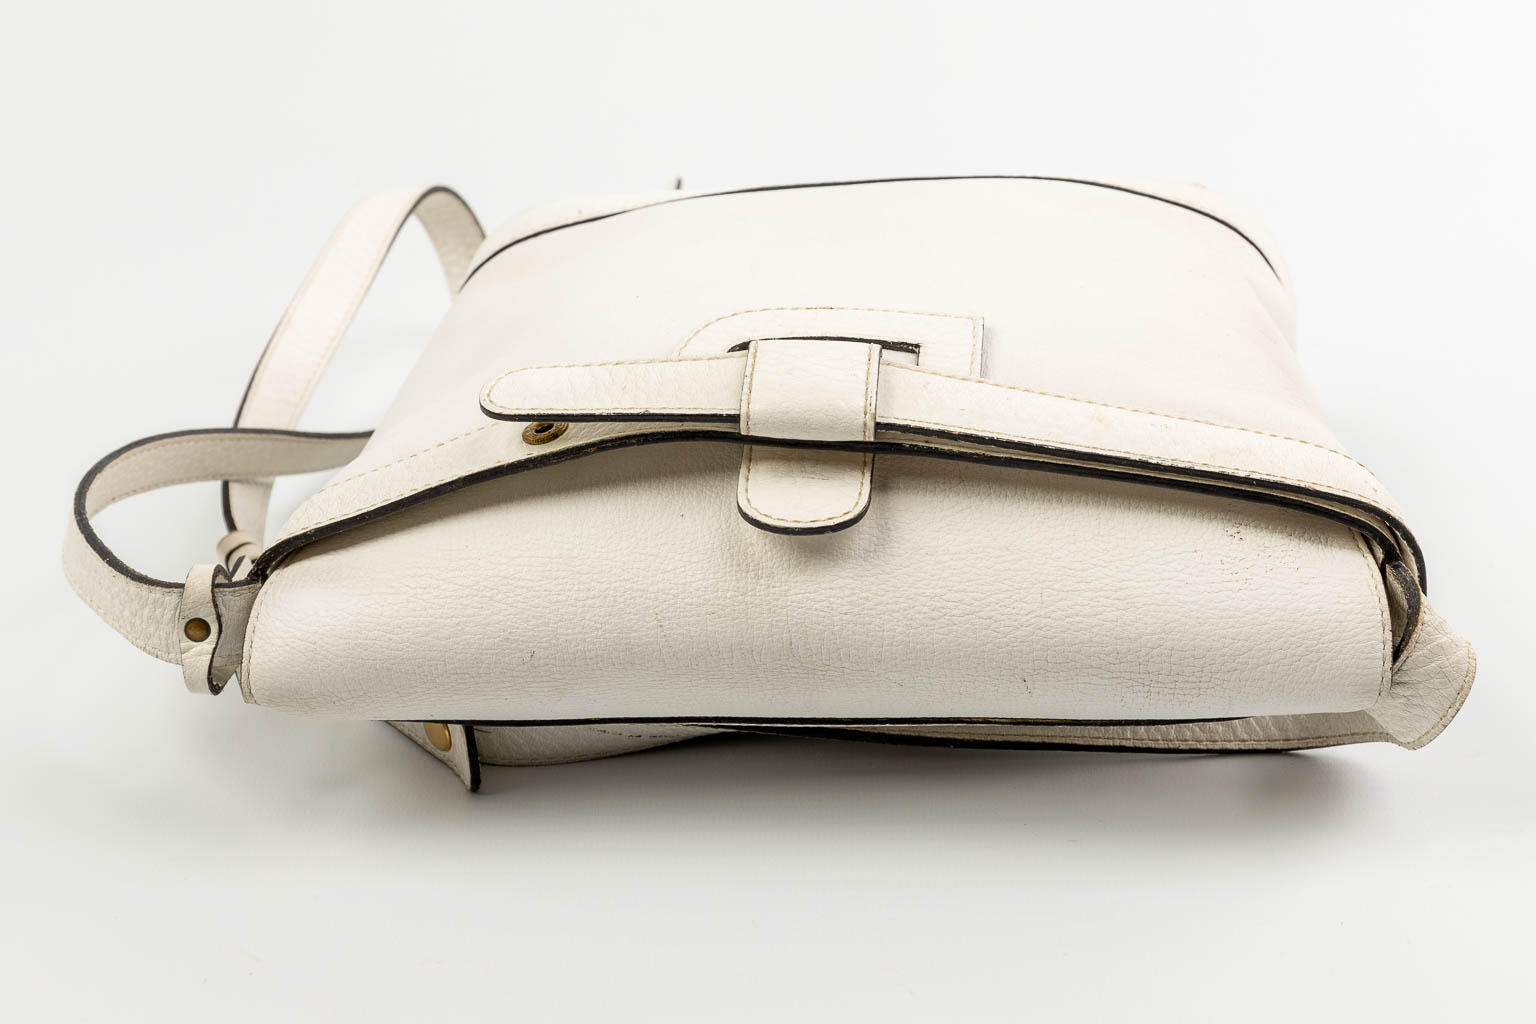 A purse made of white leather and marked Delvaux. 